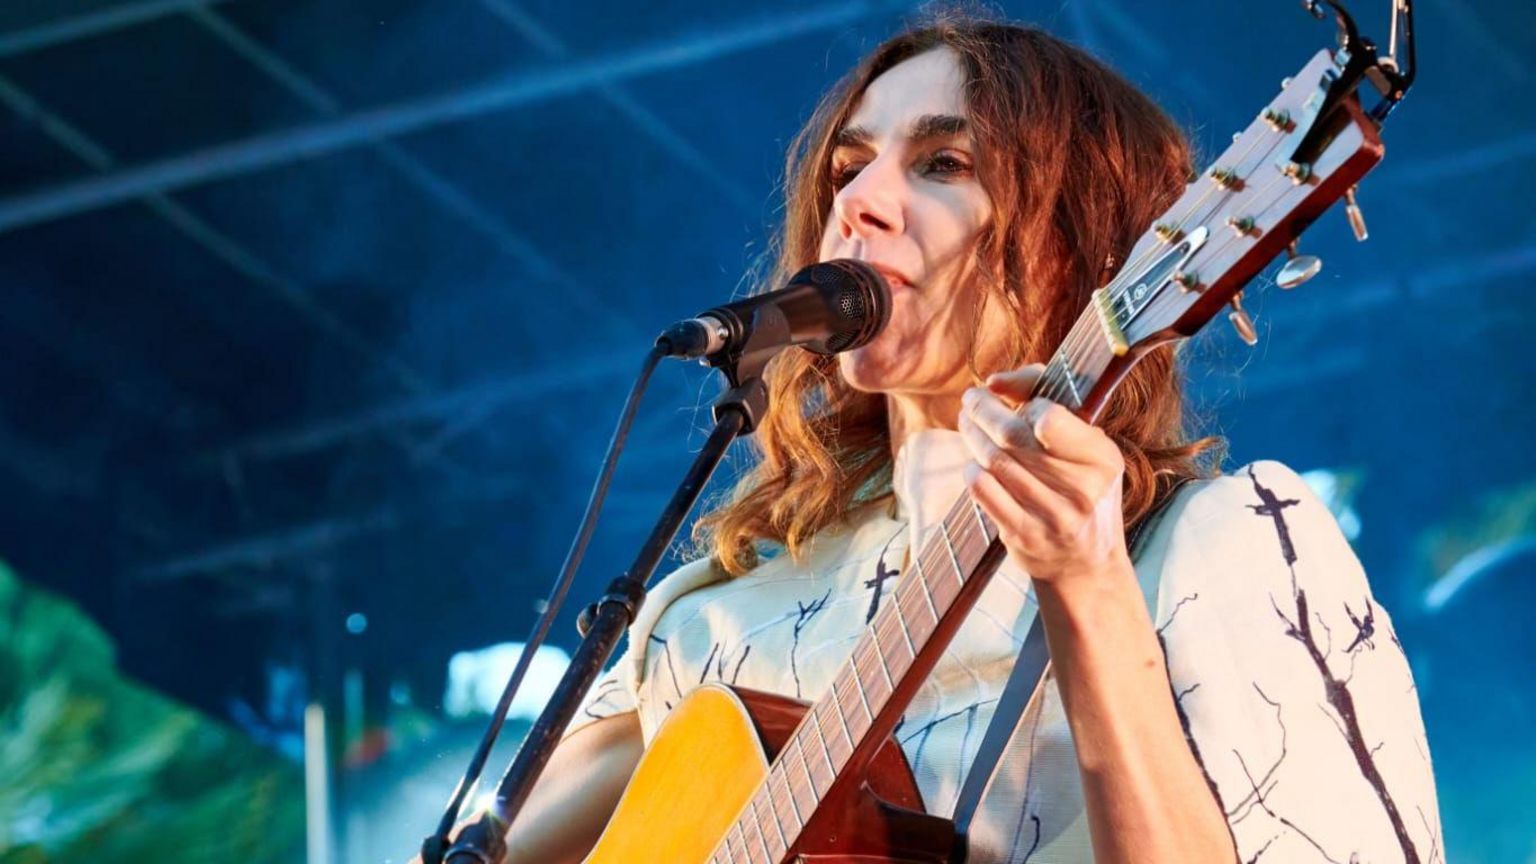 PJ Harvey holding an acoustic guitar and singing into a microphone. She has shoulder length curly brown hair and is wearing a fitted white dress.